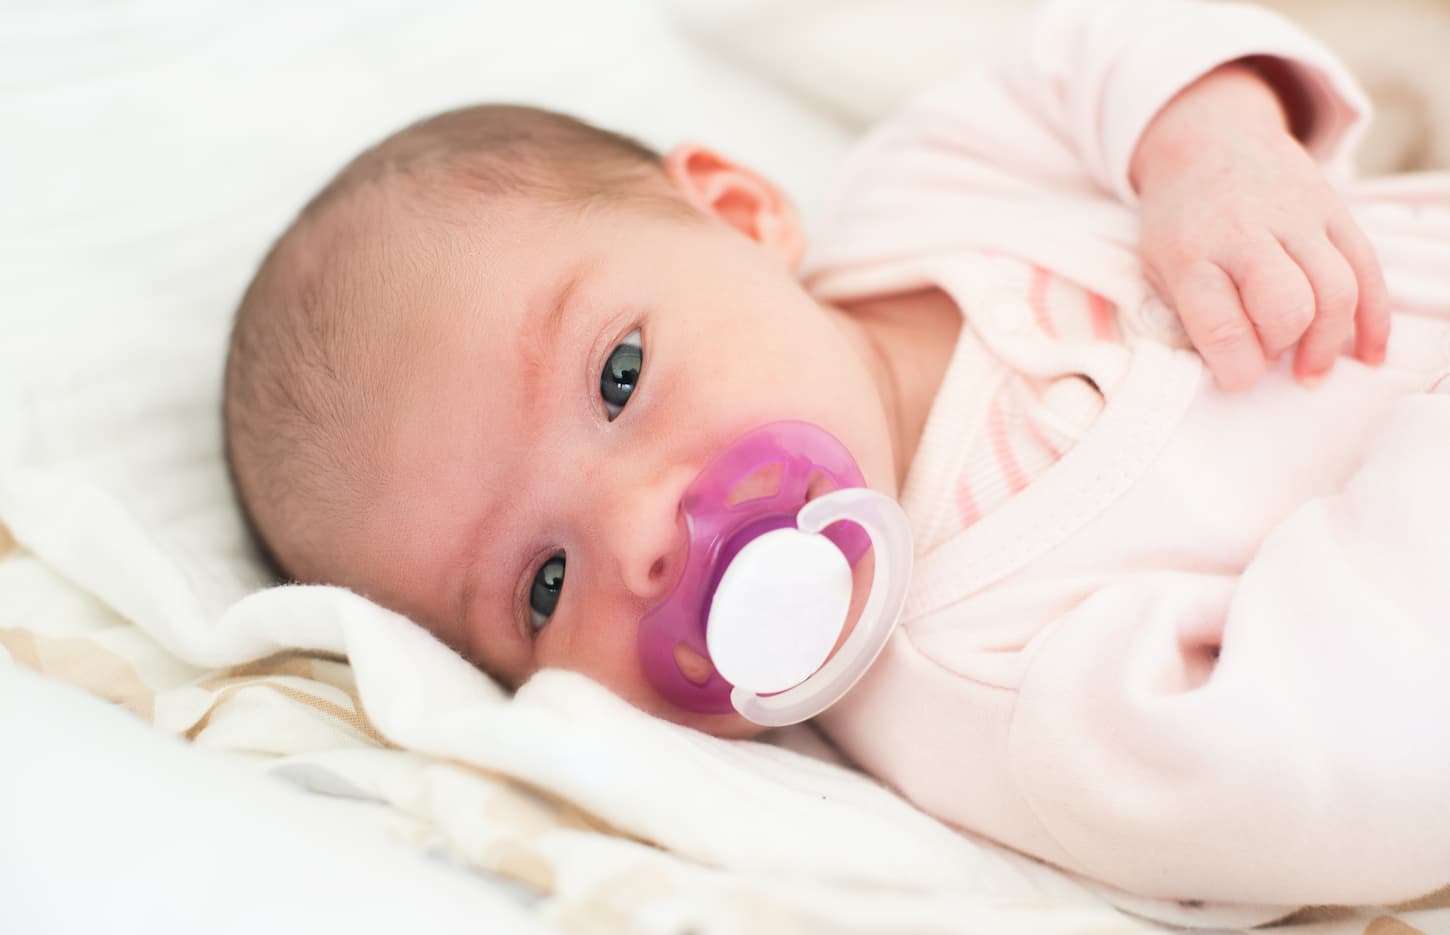 An image of a newborn baby lying on its side with a soothing pacifier.